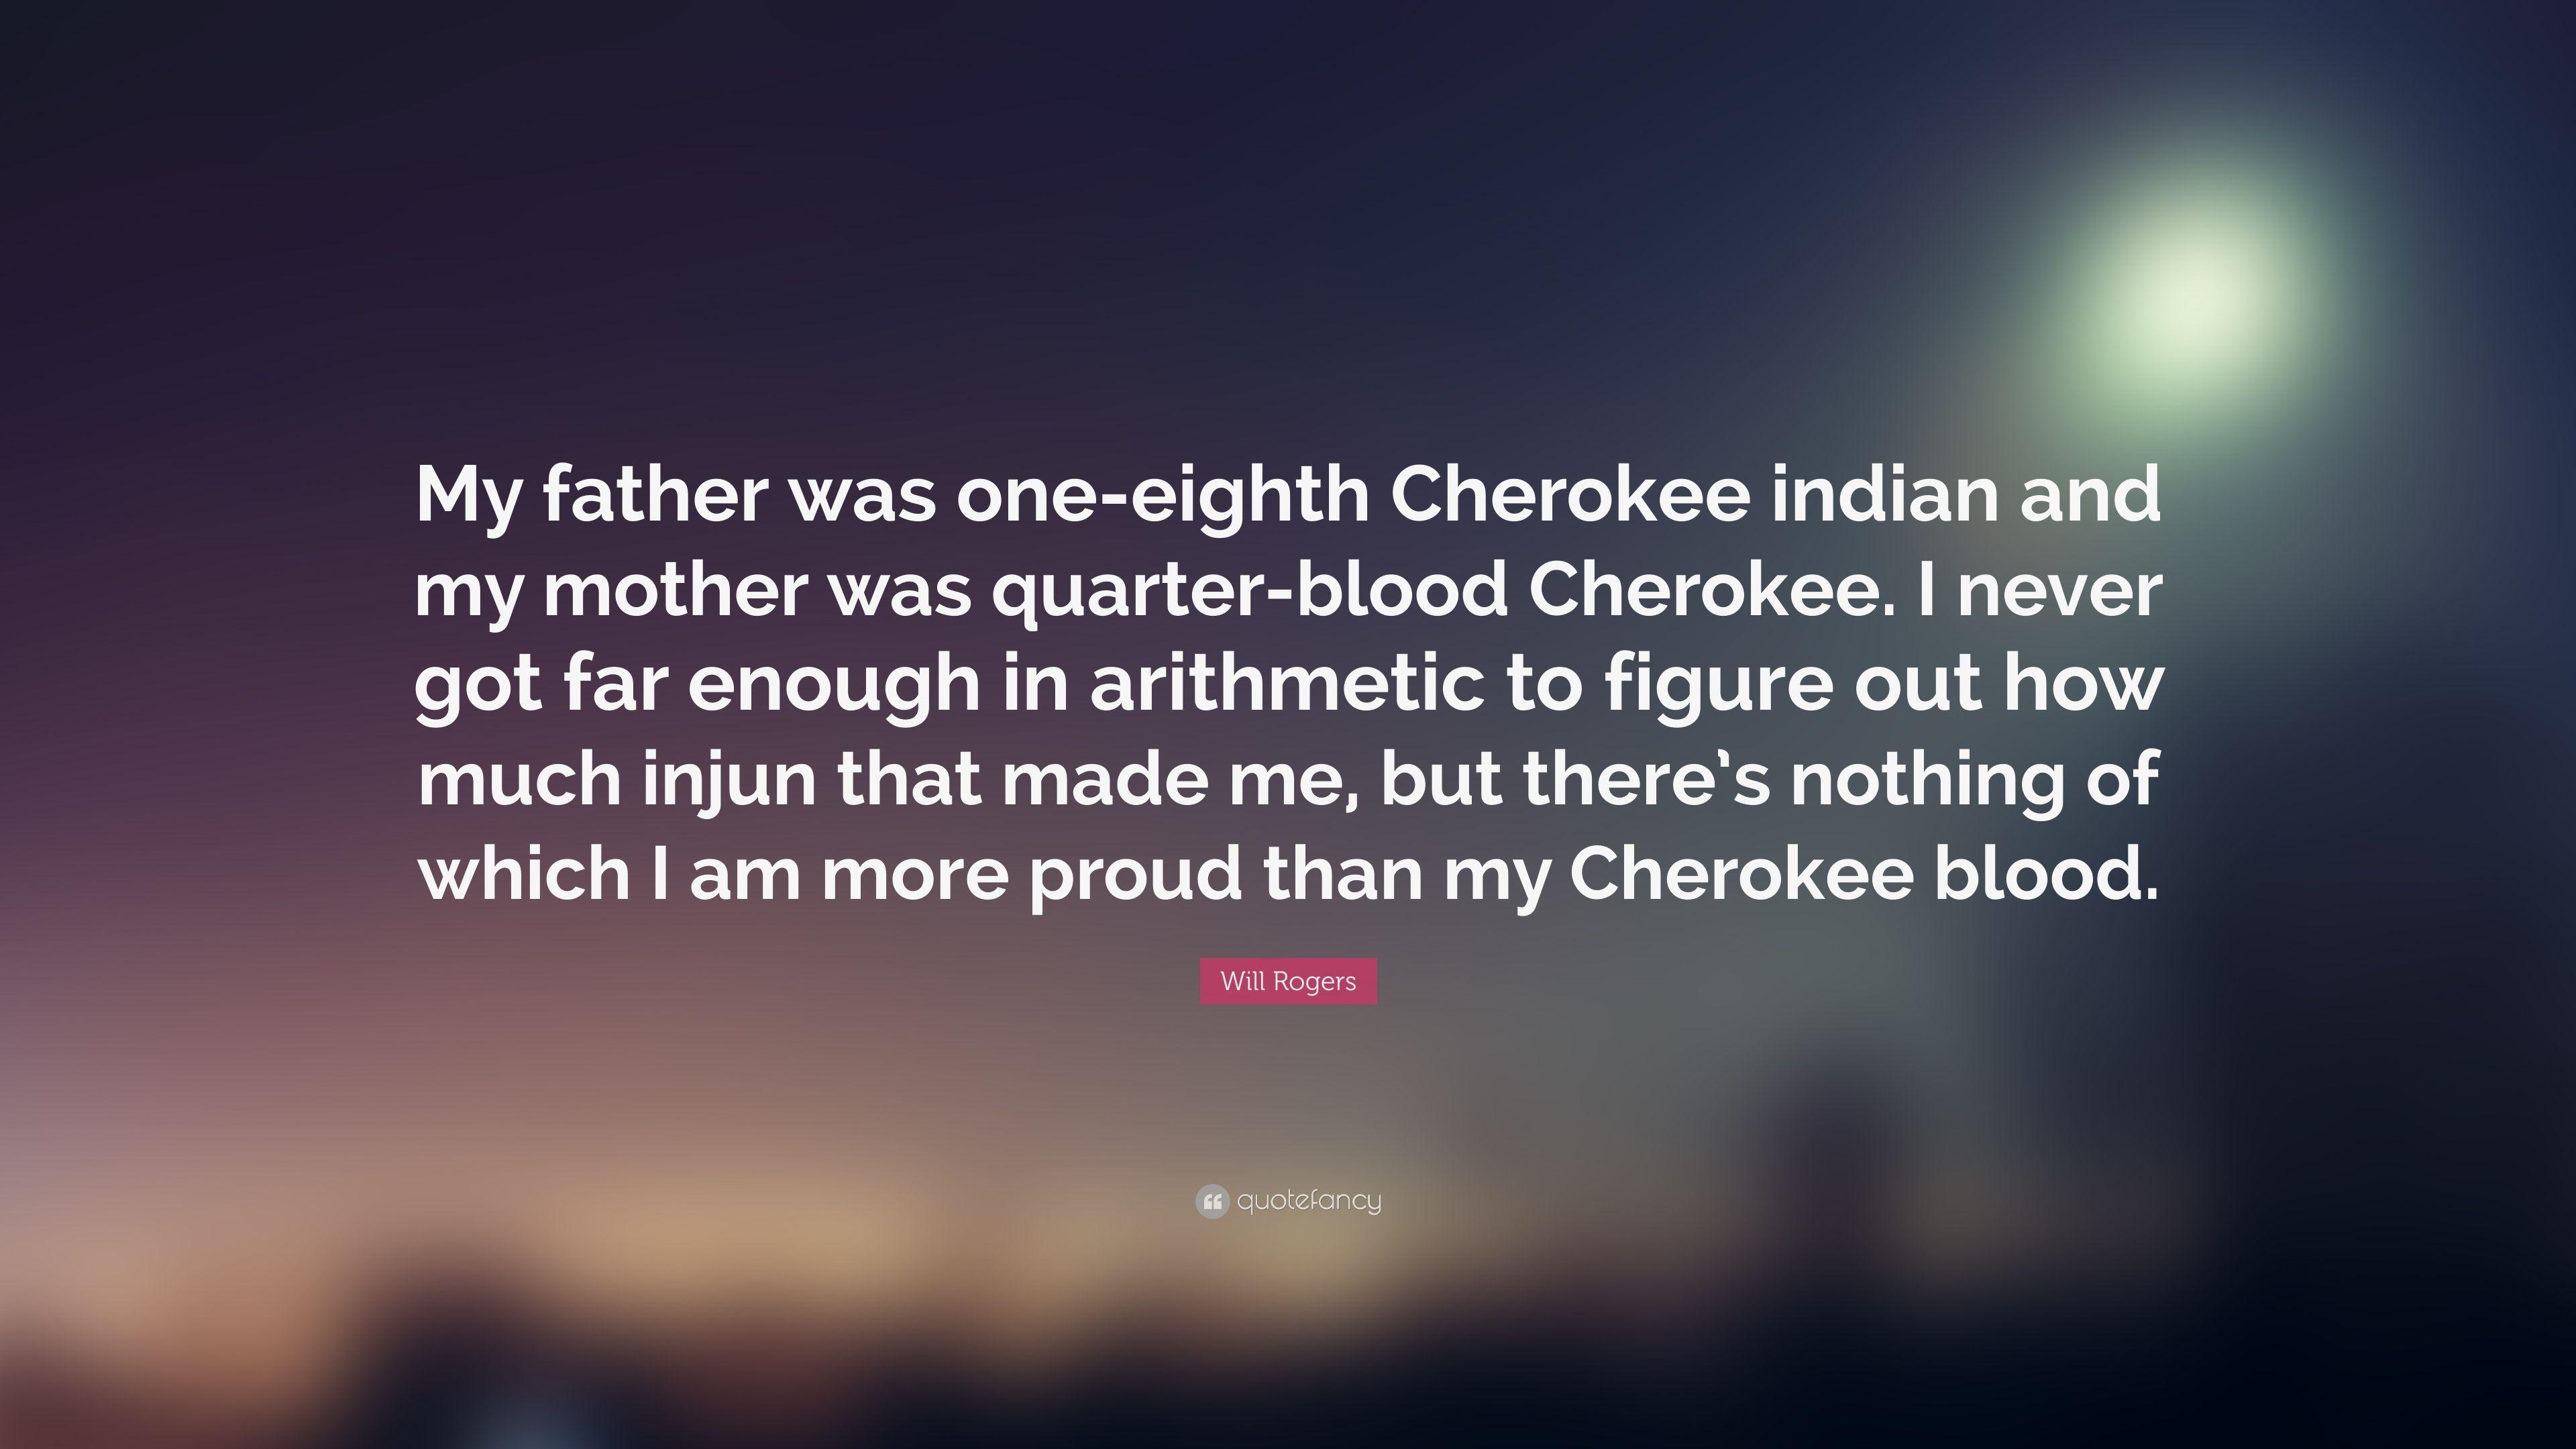 Will Rogers Quote: “My Father Was One Eighth Cherokee Indian